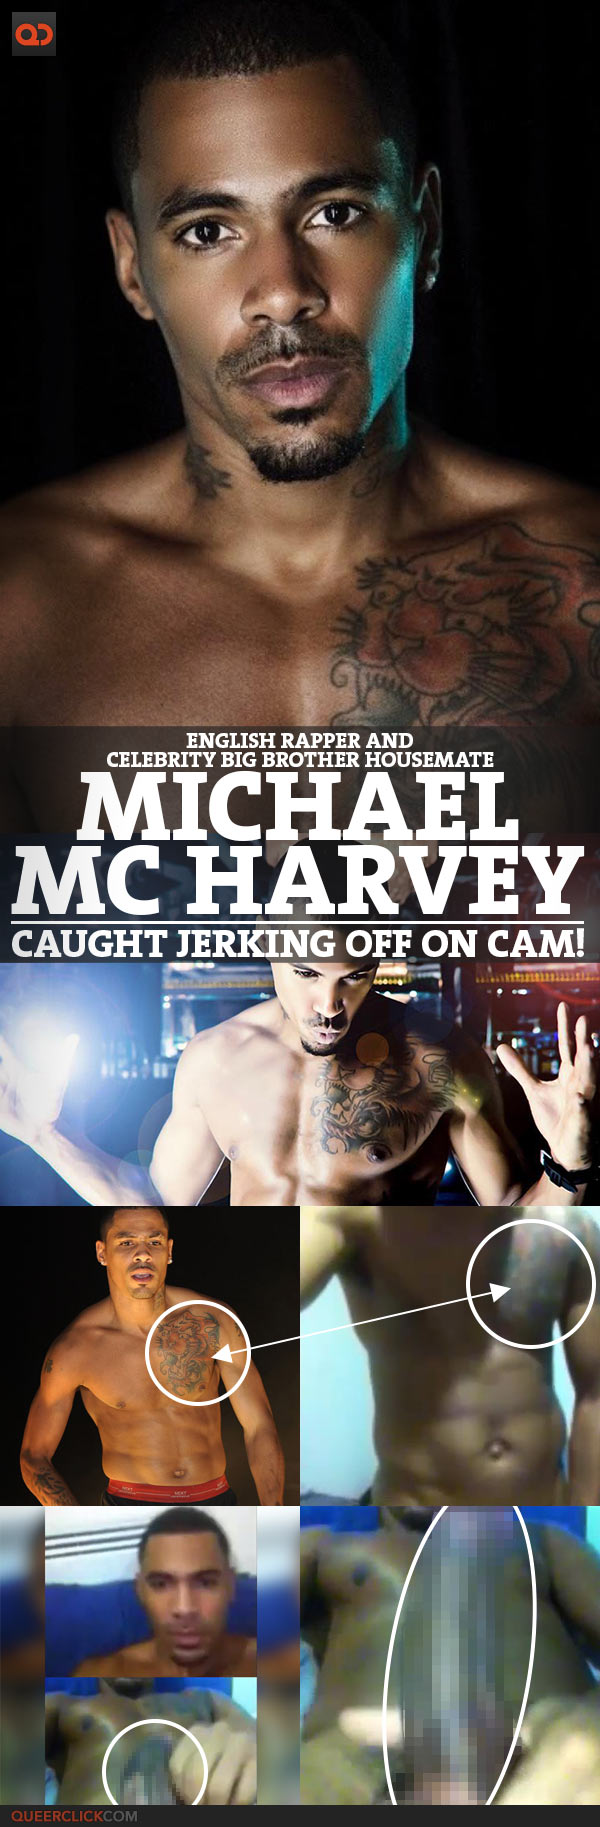 Michael “MC” Harvey, English Rapper And Celebrity Big Brother Housemate, Caught Jerking Off On Cam!